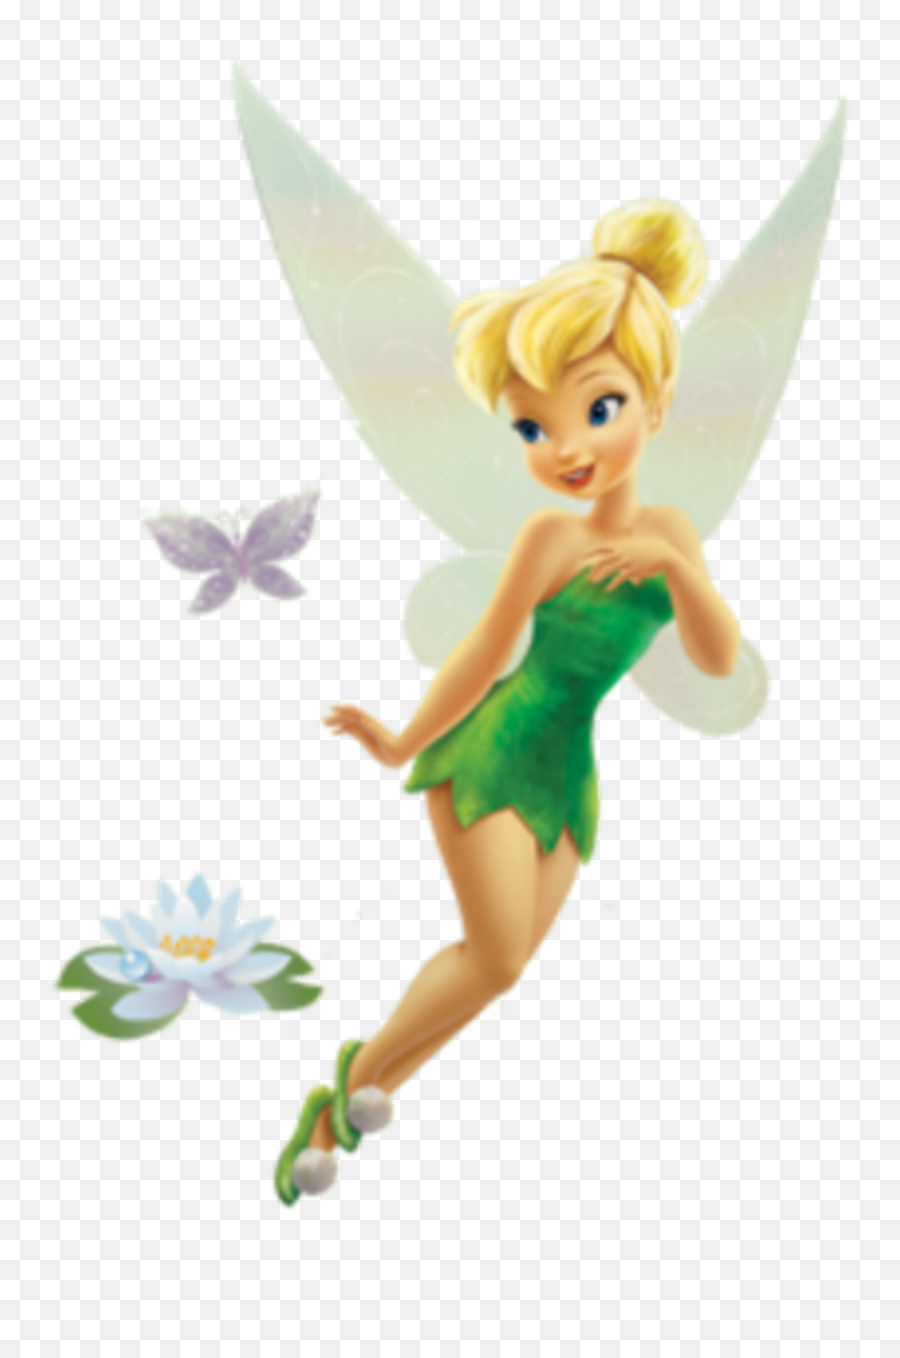 Tinkerbell Fairy Sticker By R Dayberry - Tinkerbell Friendship Quotes Emoji,Tinkerbell Emoji